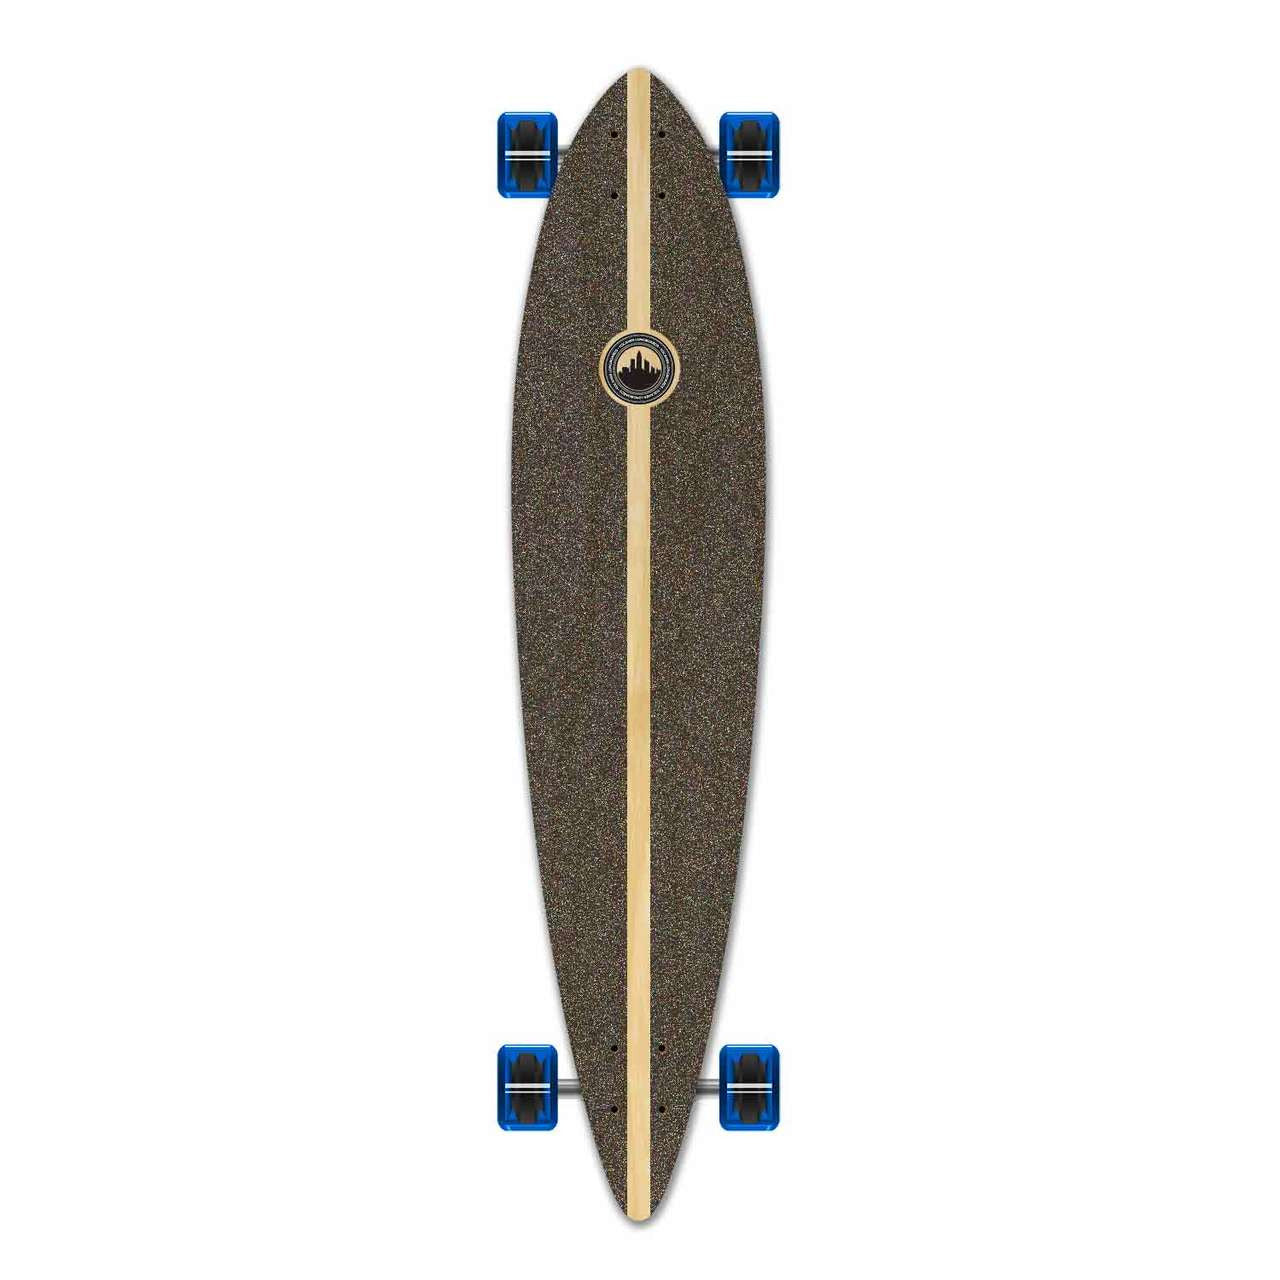 Yocaher Pintail Longboard Complete - Beach